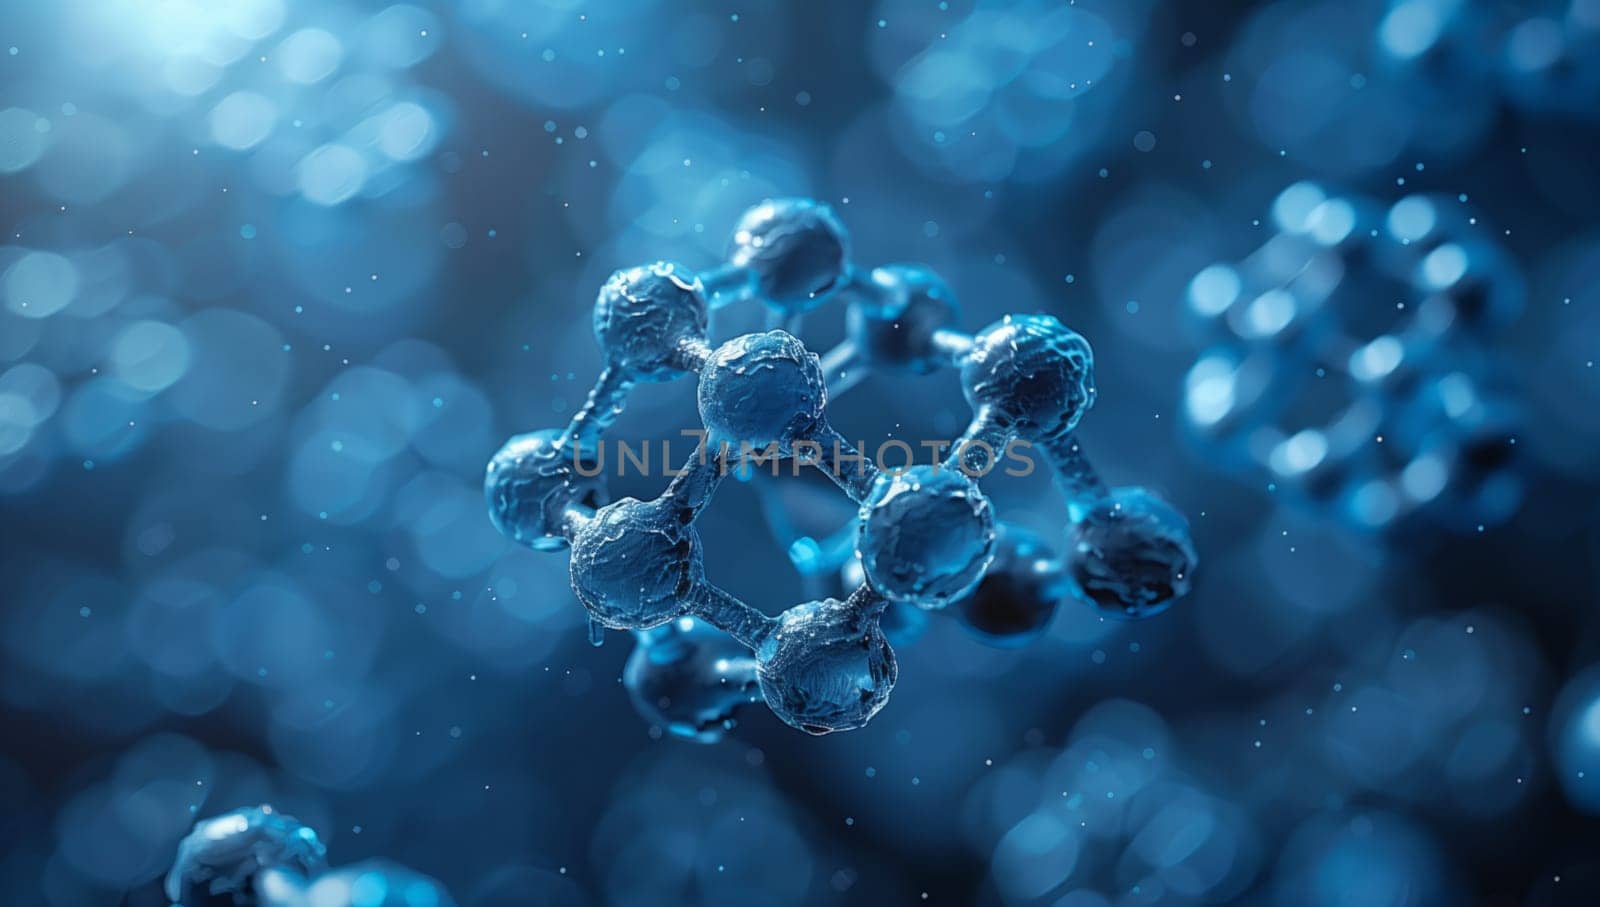 Macro photography of a water molecule on an electric blue background, creating a mesmerizing pattern. A blend of science and art, the liquids skylike appearance shines in the darkness